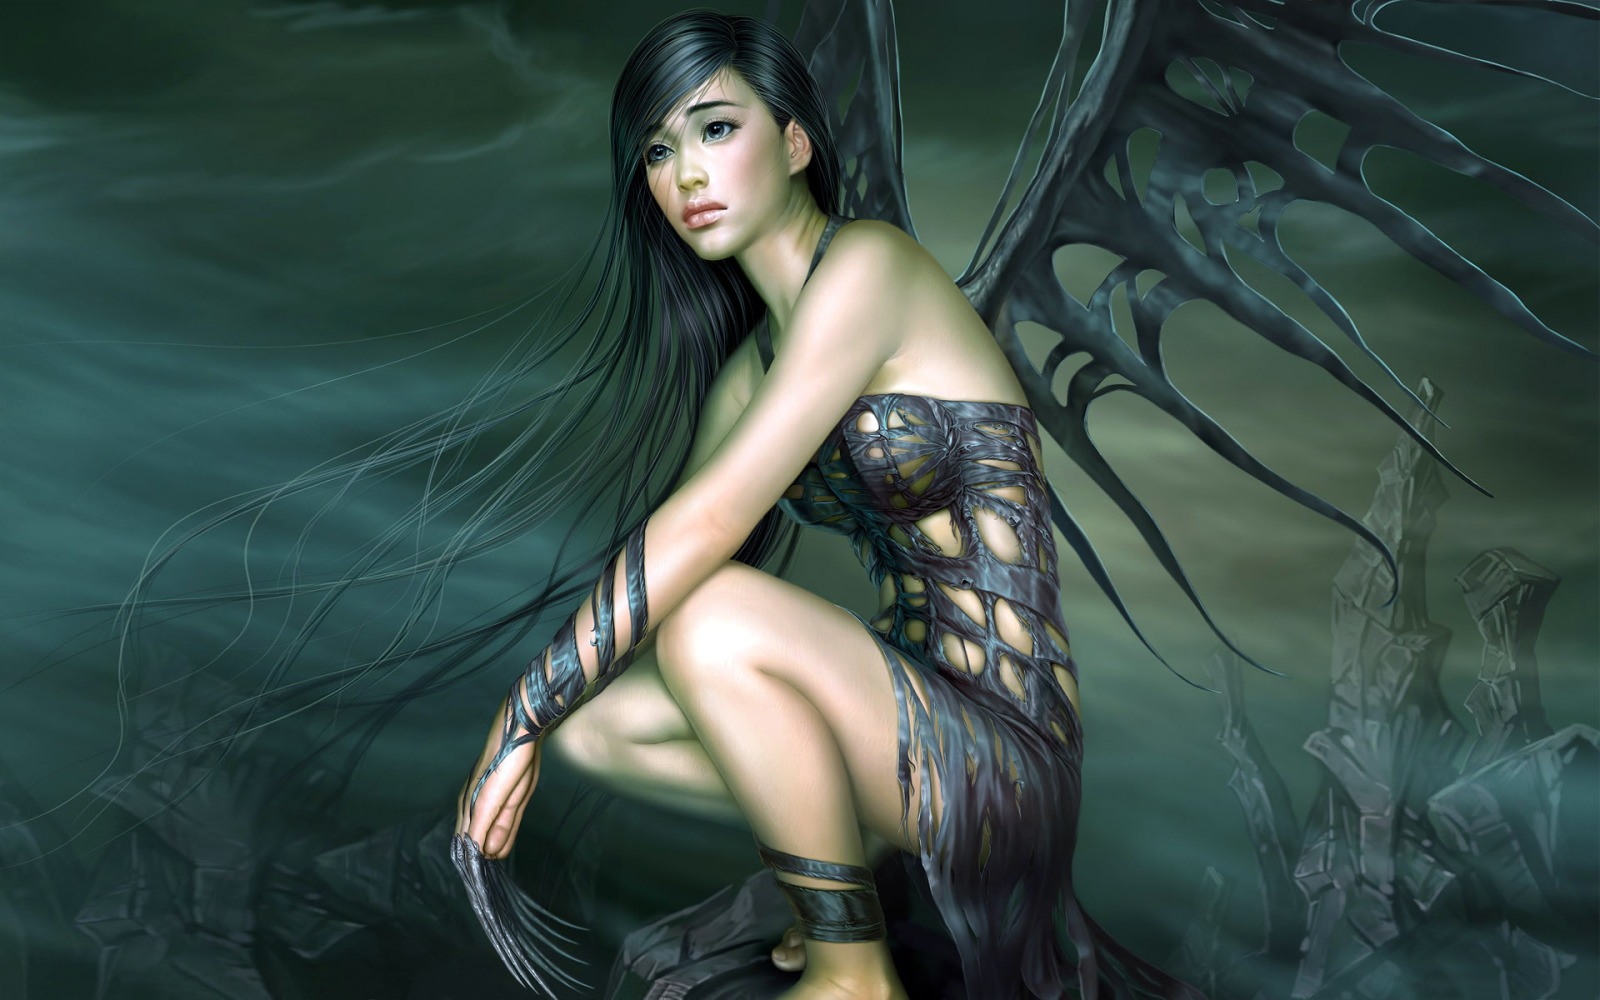 Fairy Background Wallpapers here you can see Beautiful Dark 3D Fairy 1600x1000